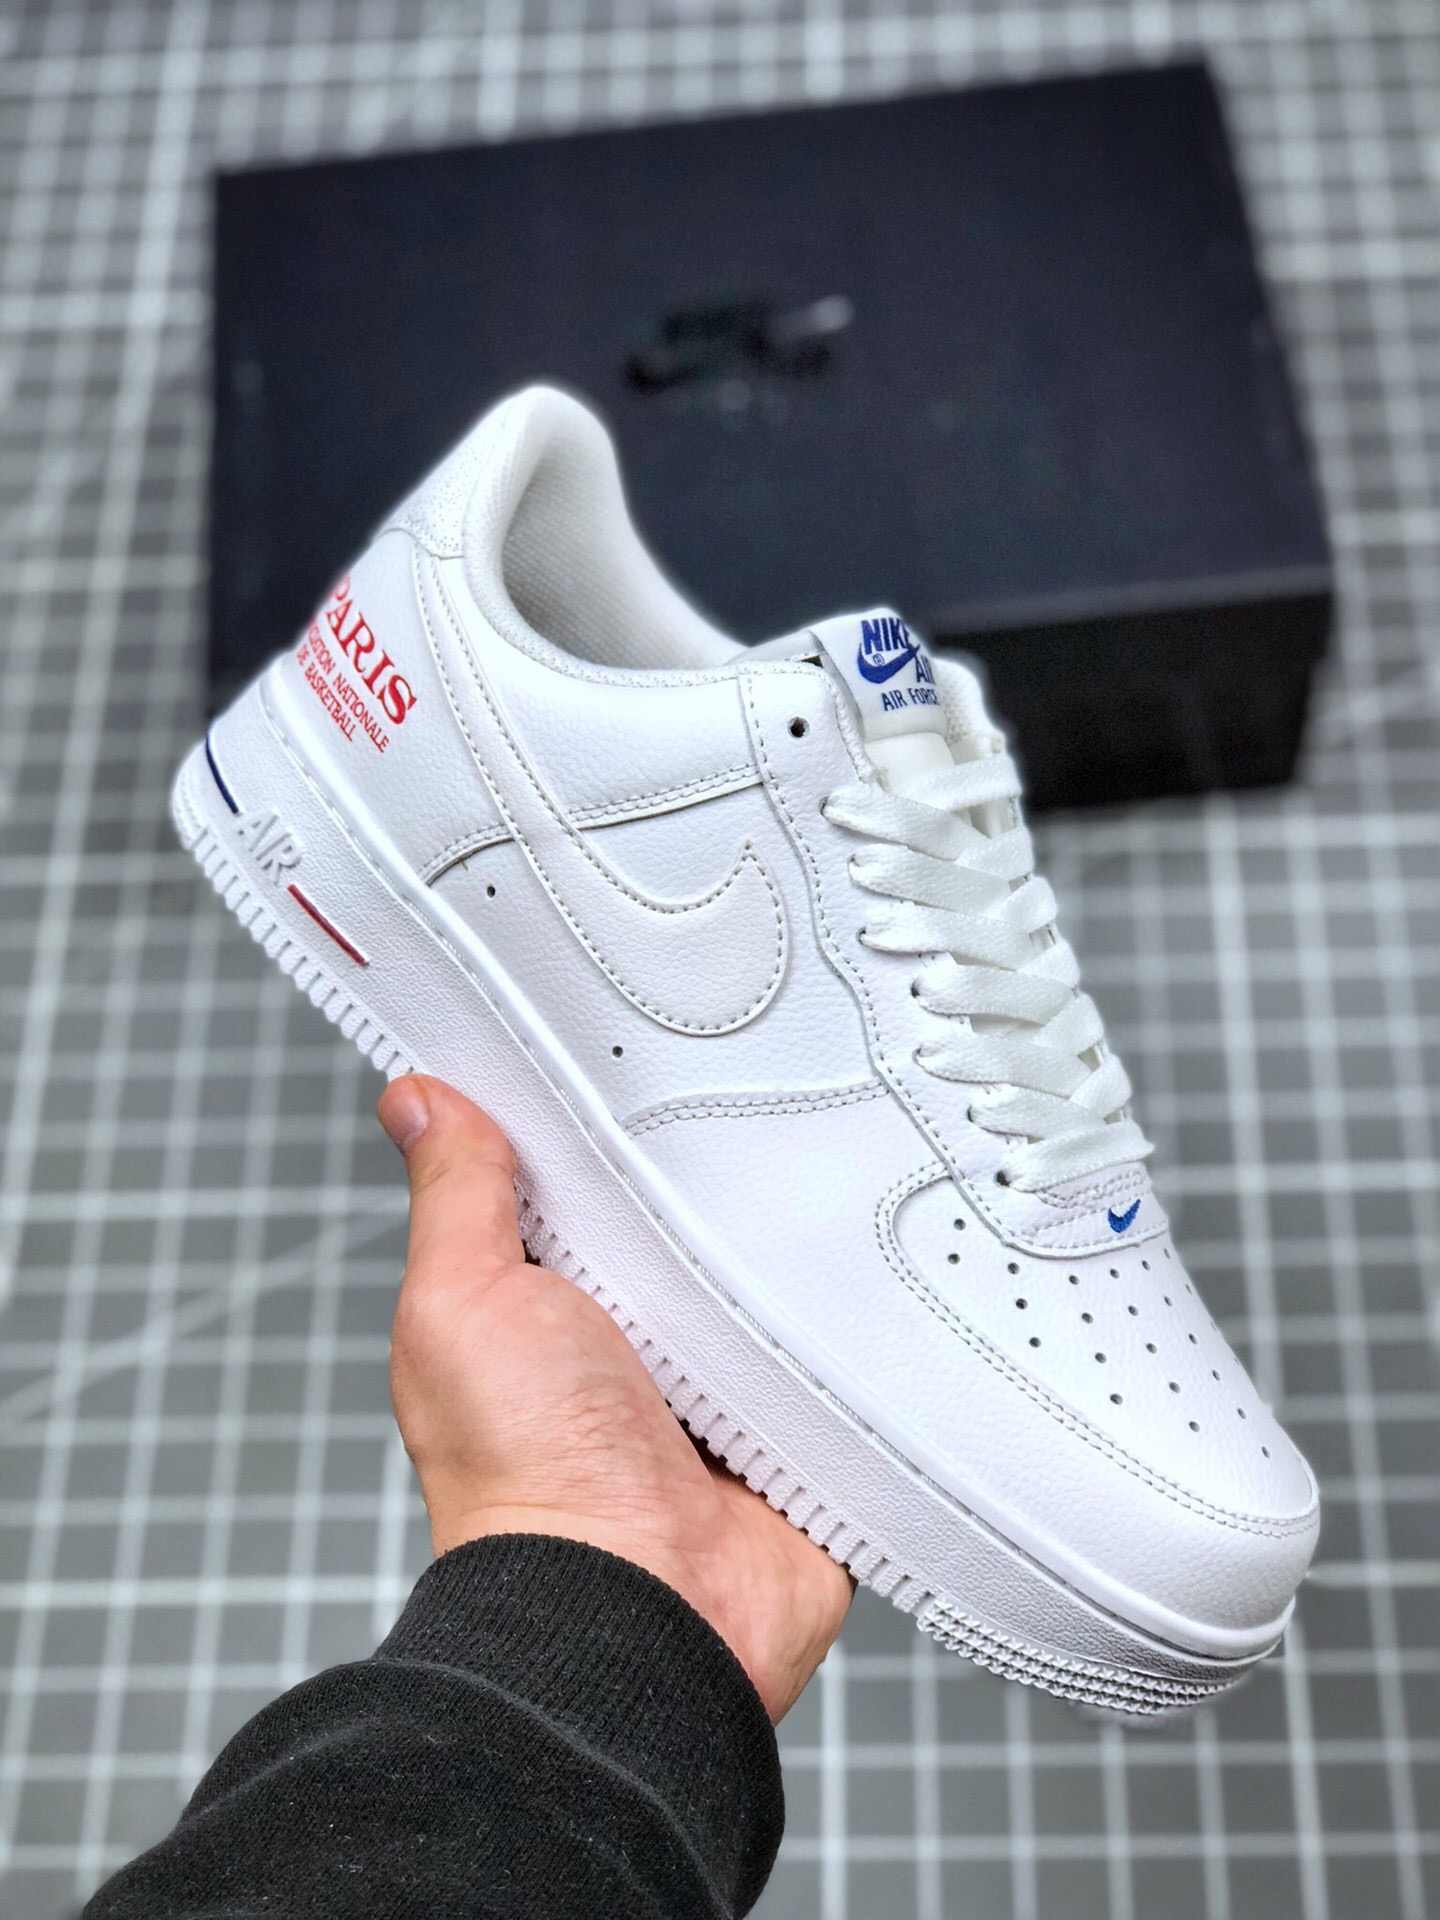 Nike Air Force 1 Low “NBA Paris” White/University Red For Sale 